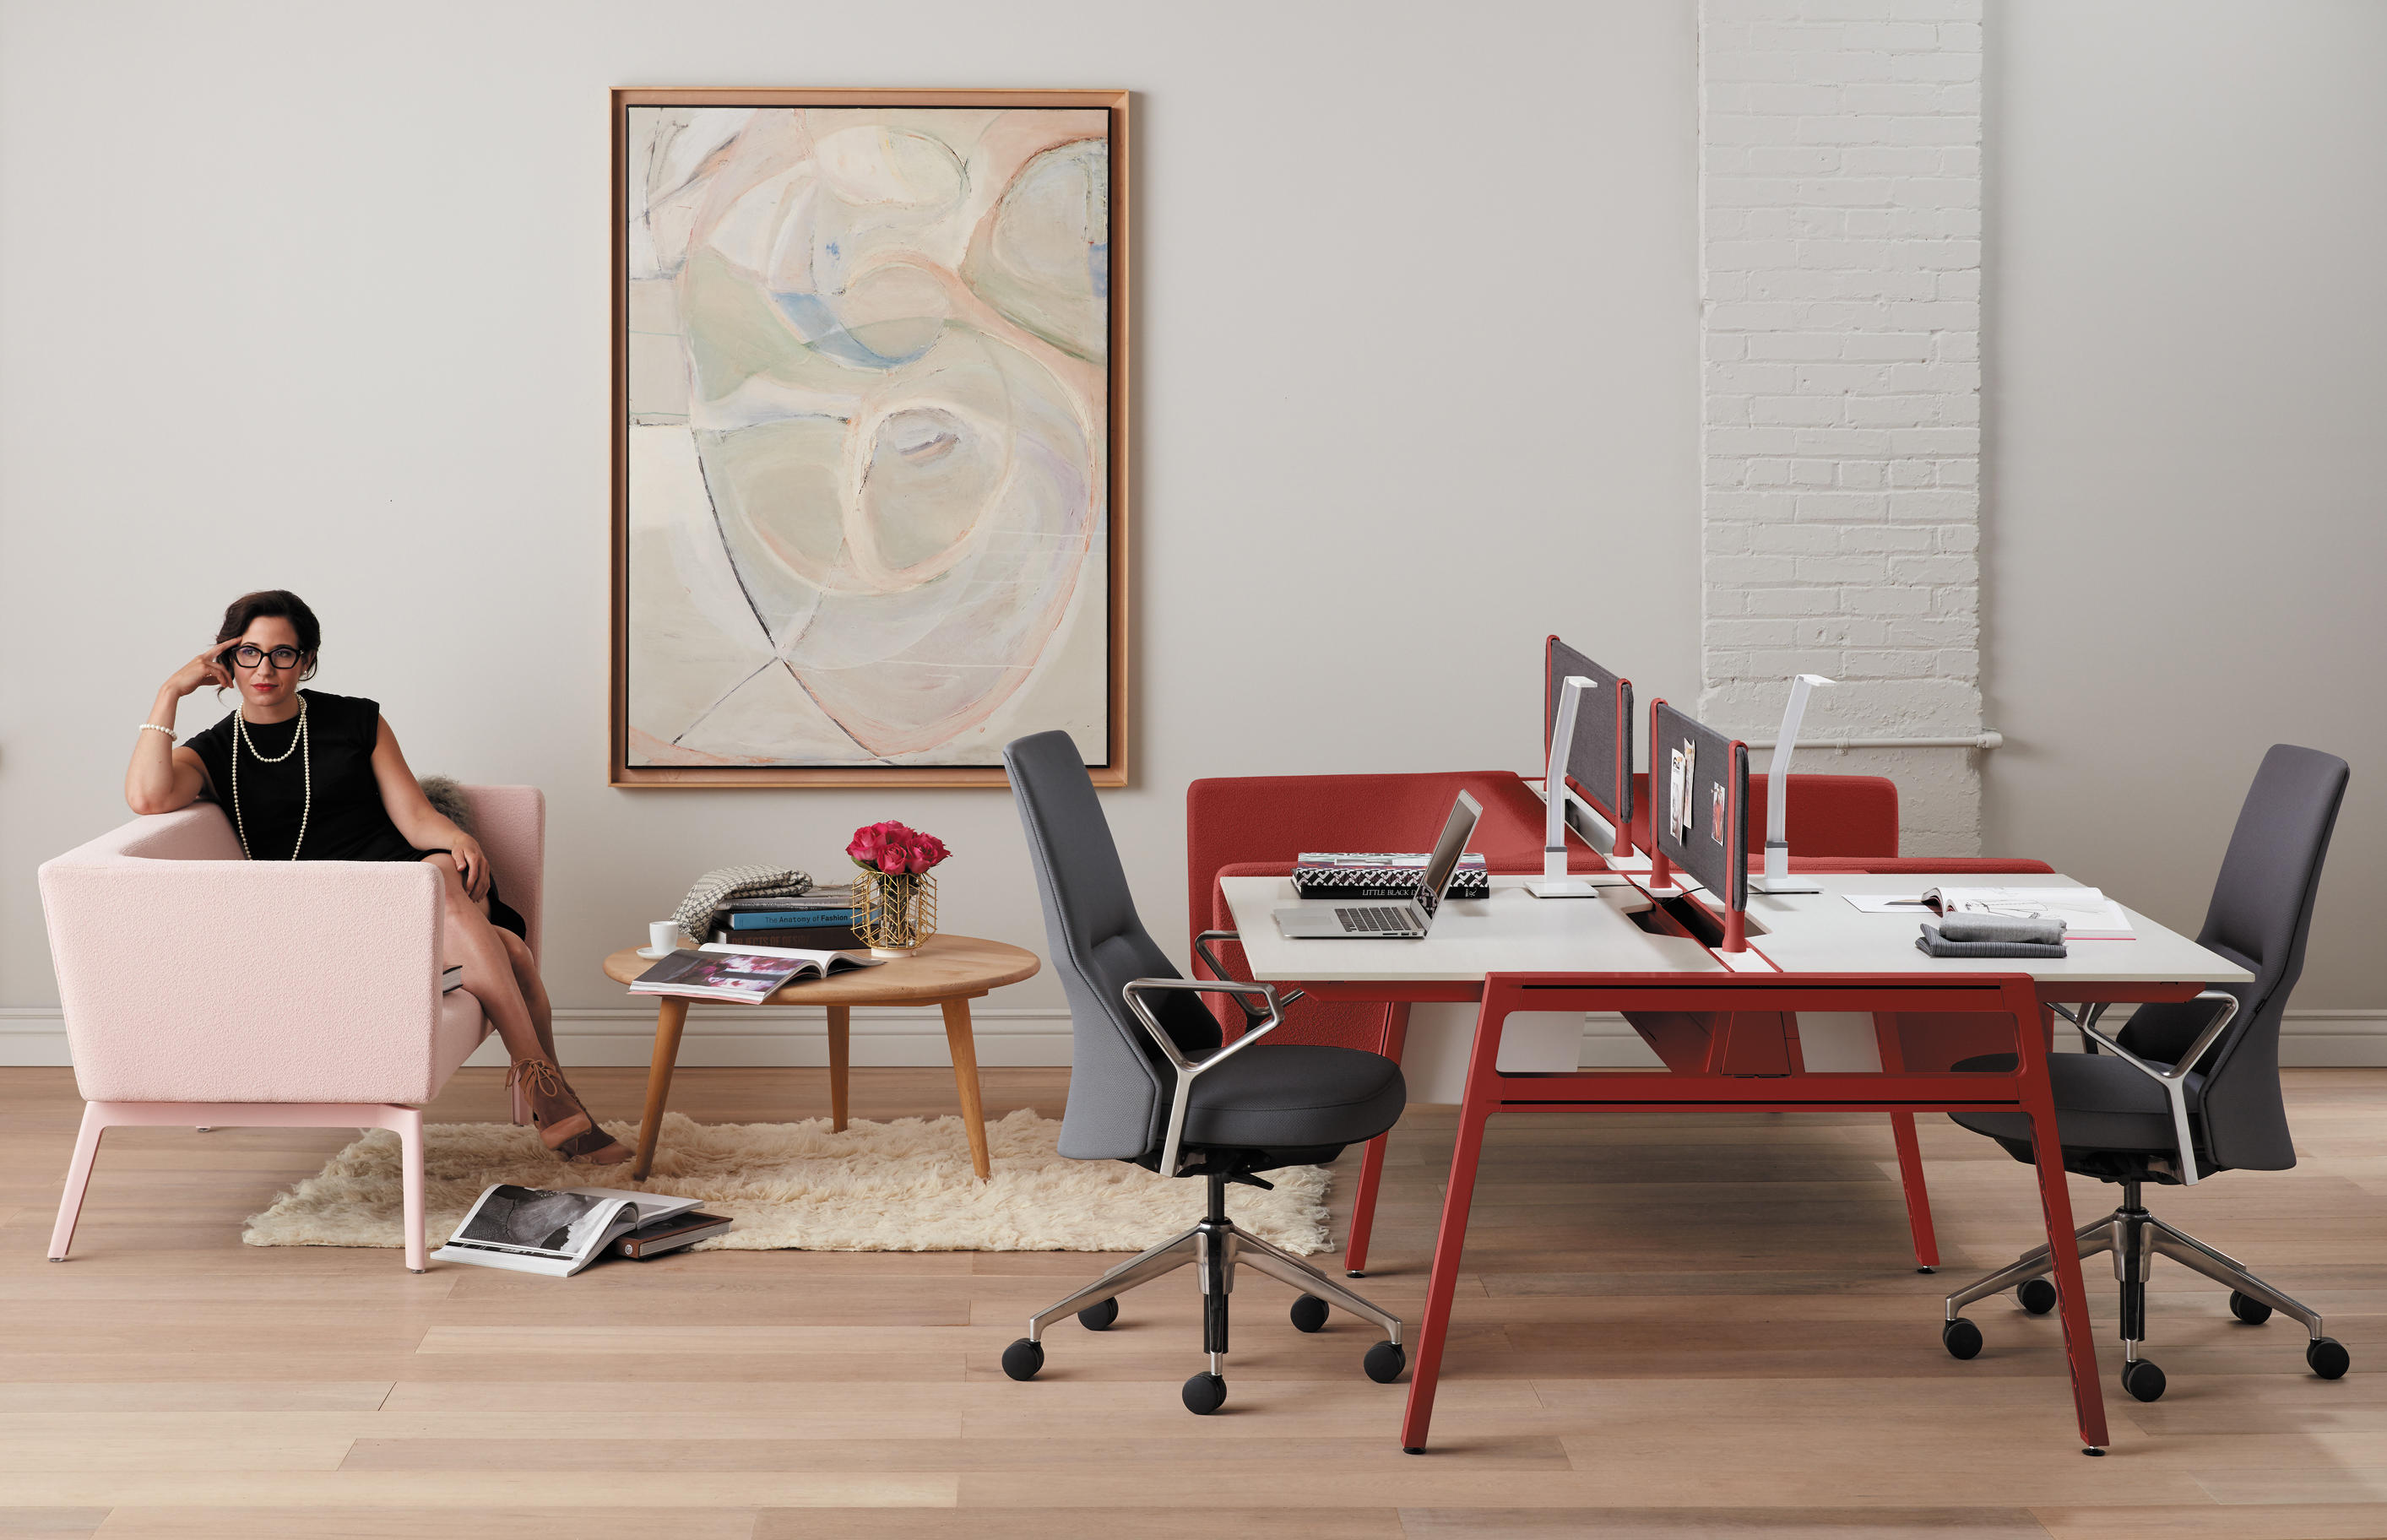 The tables are turning: Steelcase Bivi